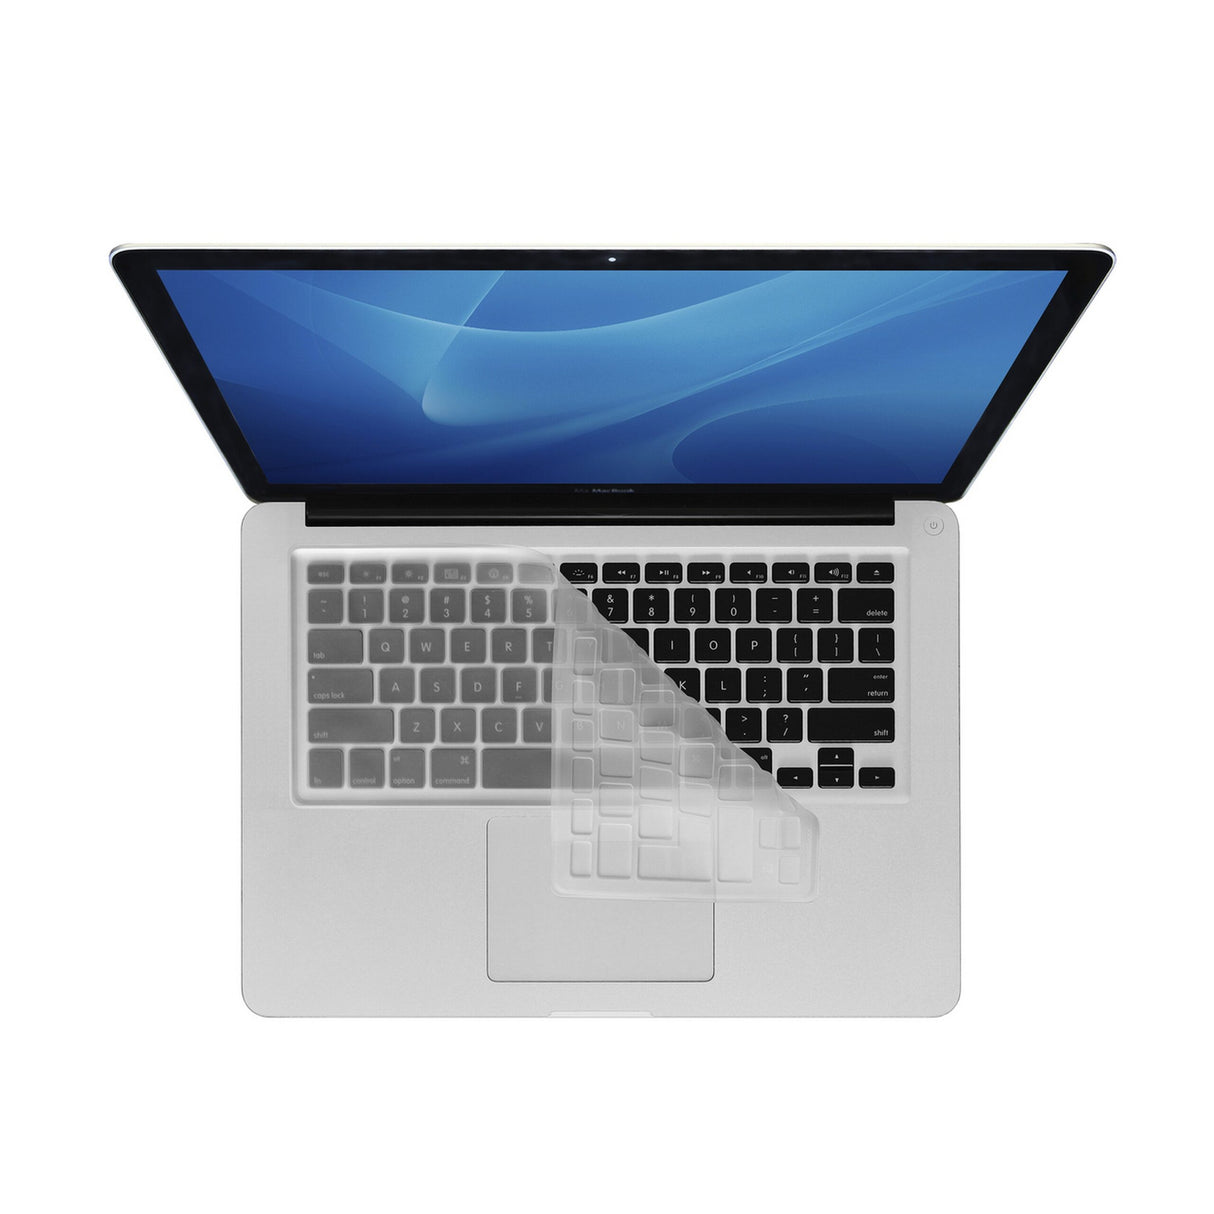 KB Covers CV-M-Clear-2 Clear Keyboard Cover for MacBook/Air 13/Pro 2008+/Retina and Wireless